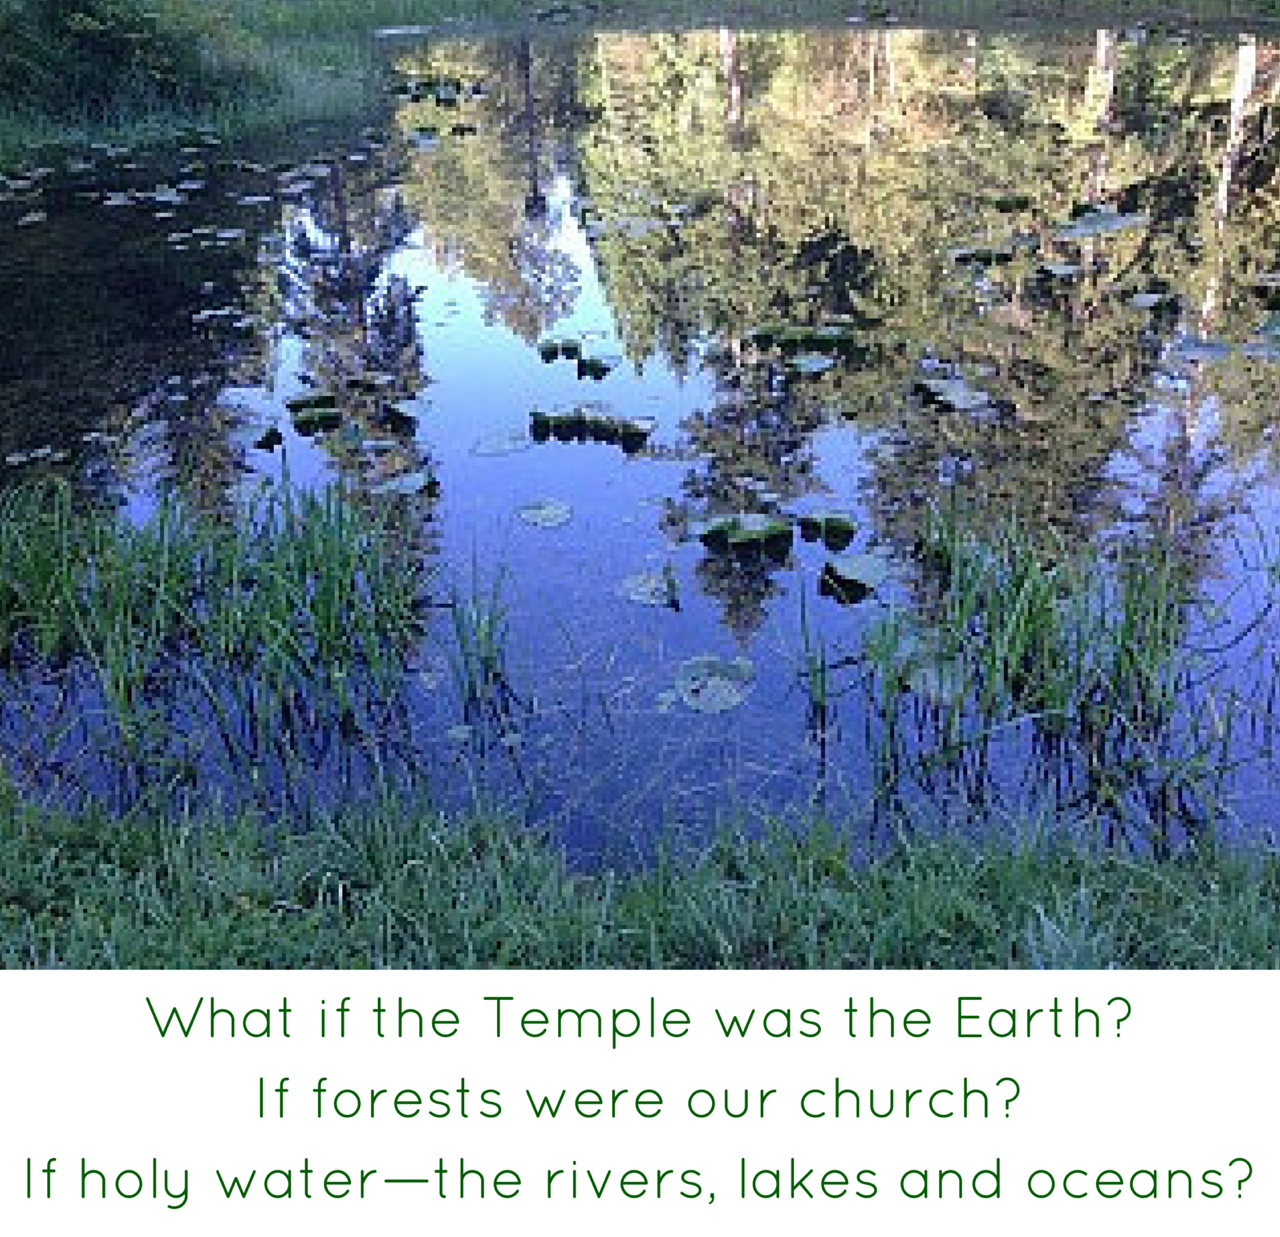 What if the Temple was the Earth?